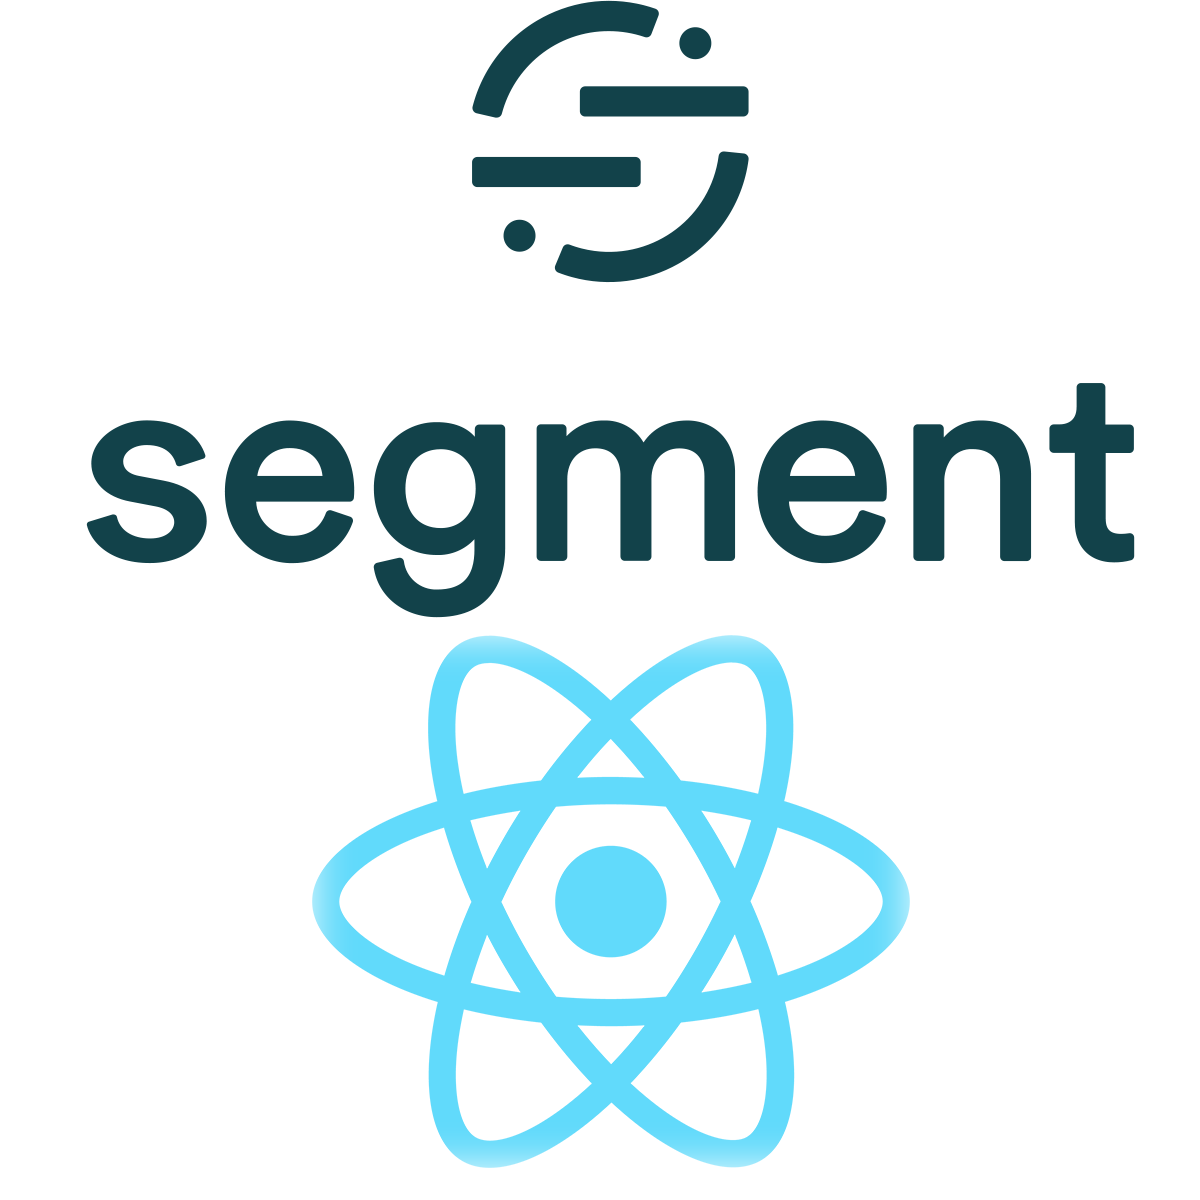 images/adding-segment-for-react.png